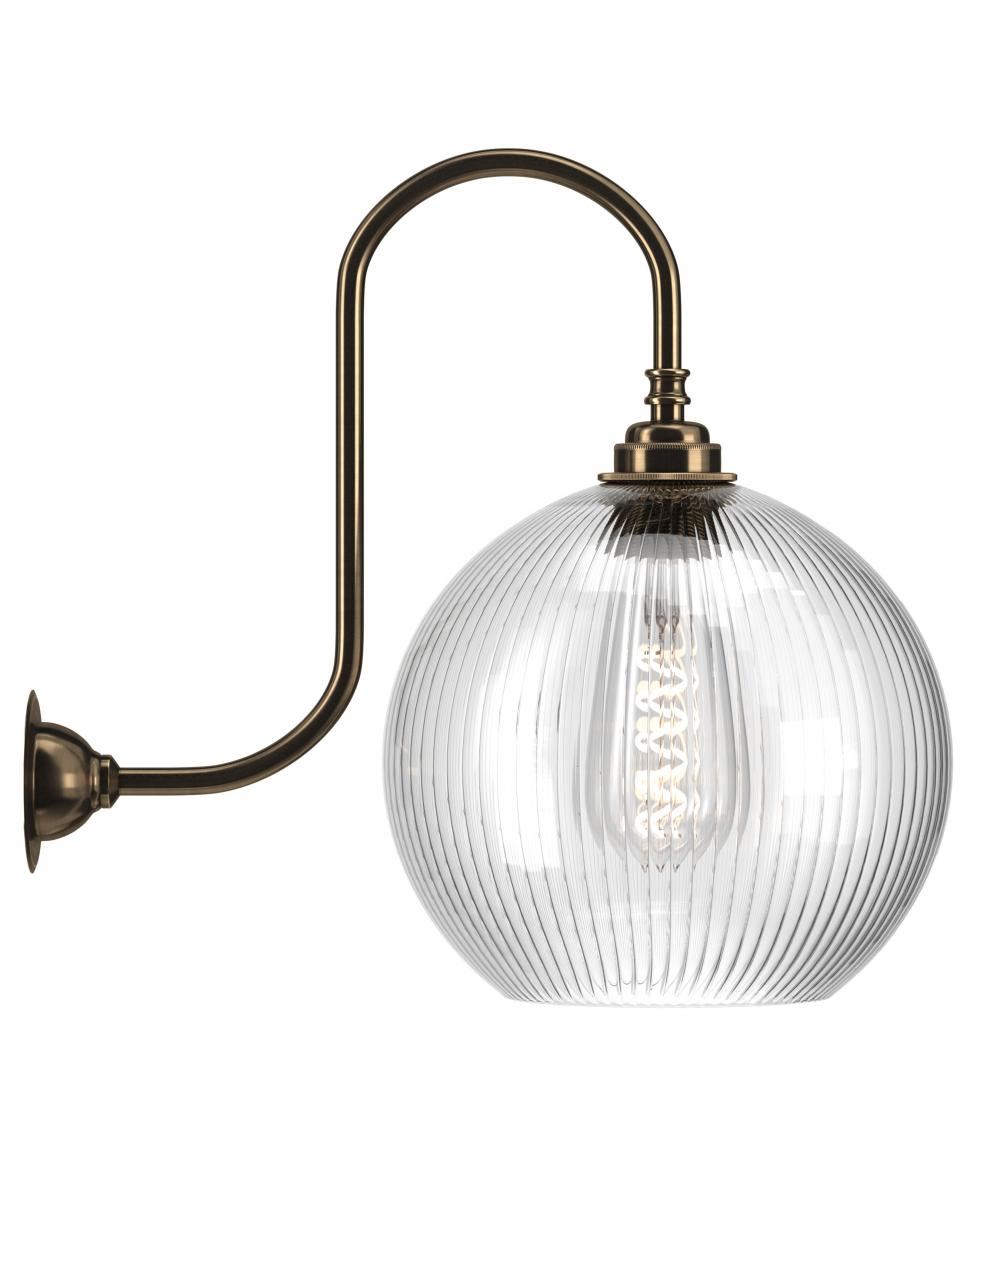 Hereford Swan Neck Wall Light Large Skinny Ribbed Antique Brass